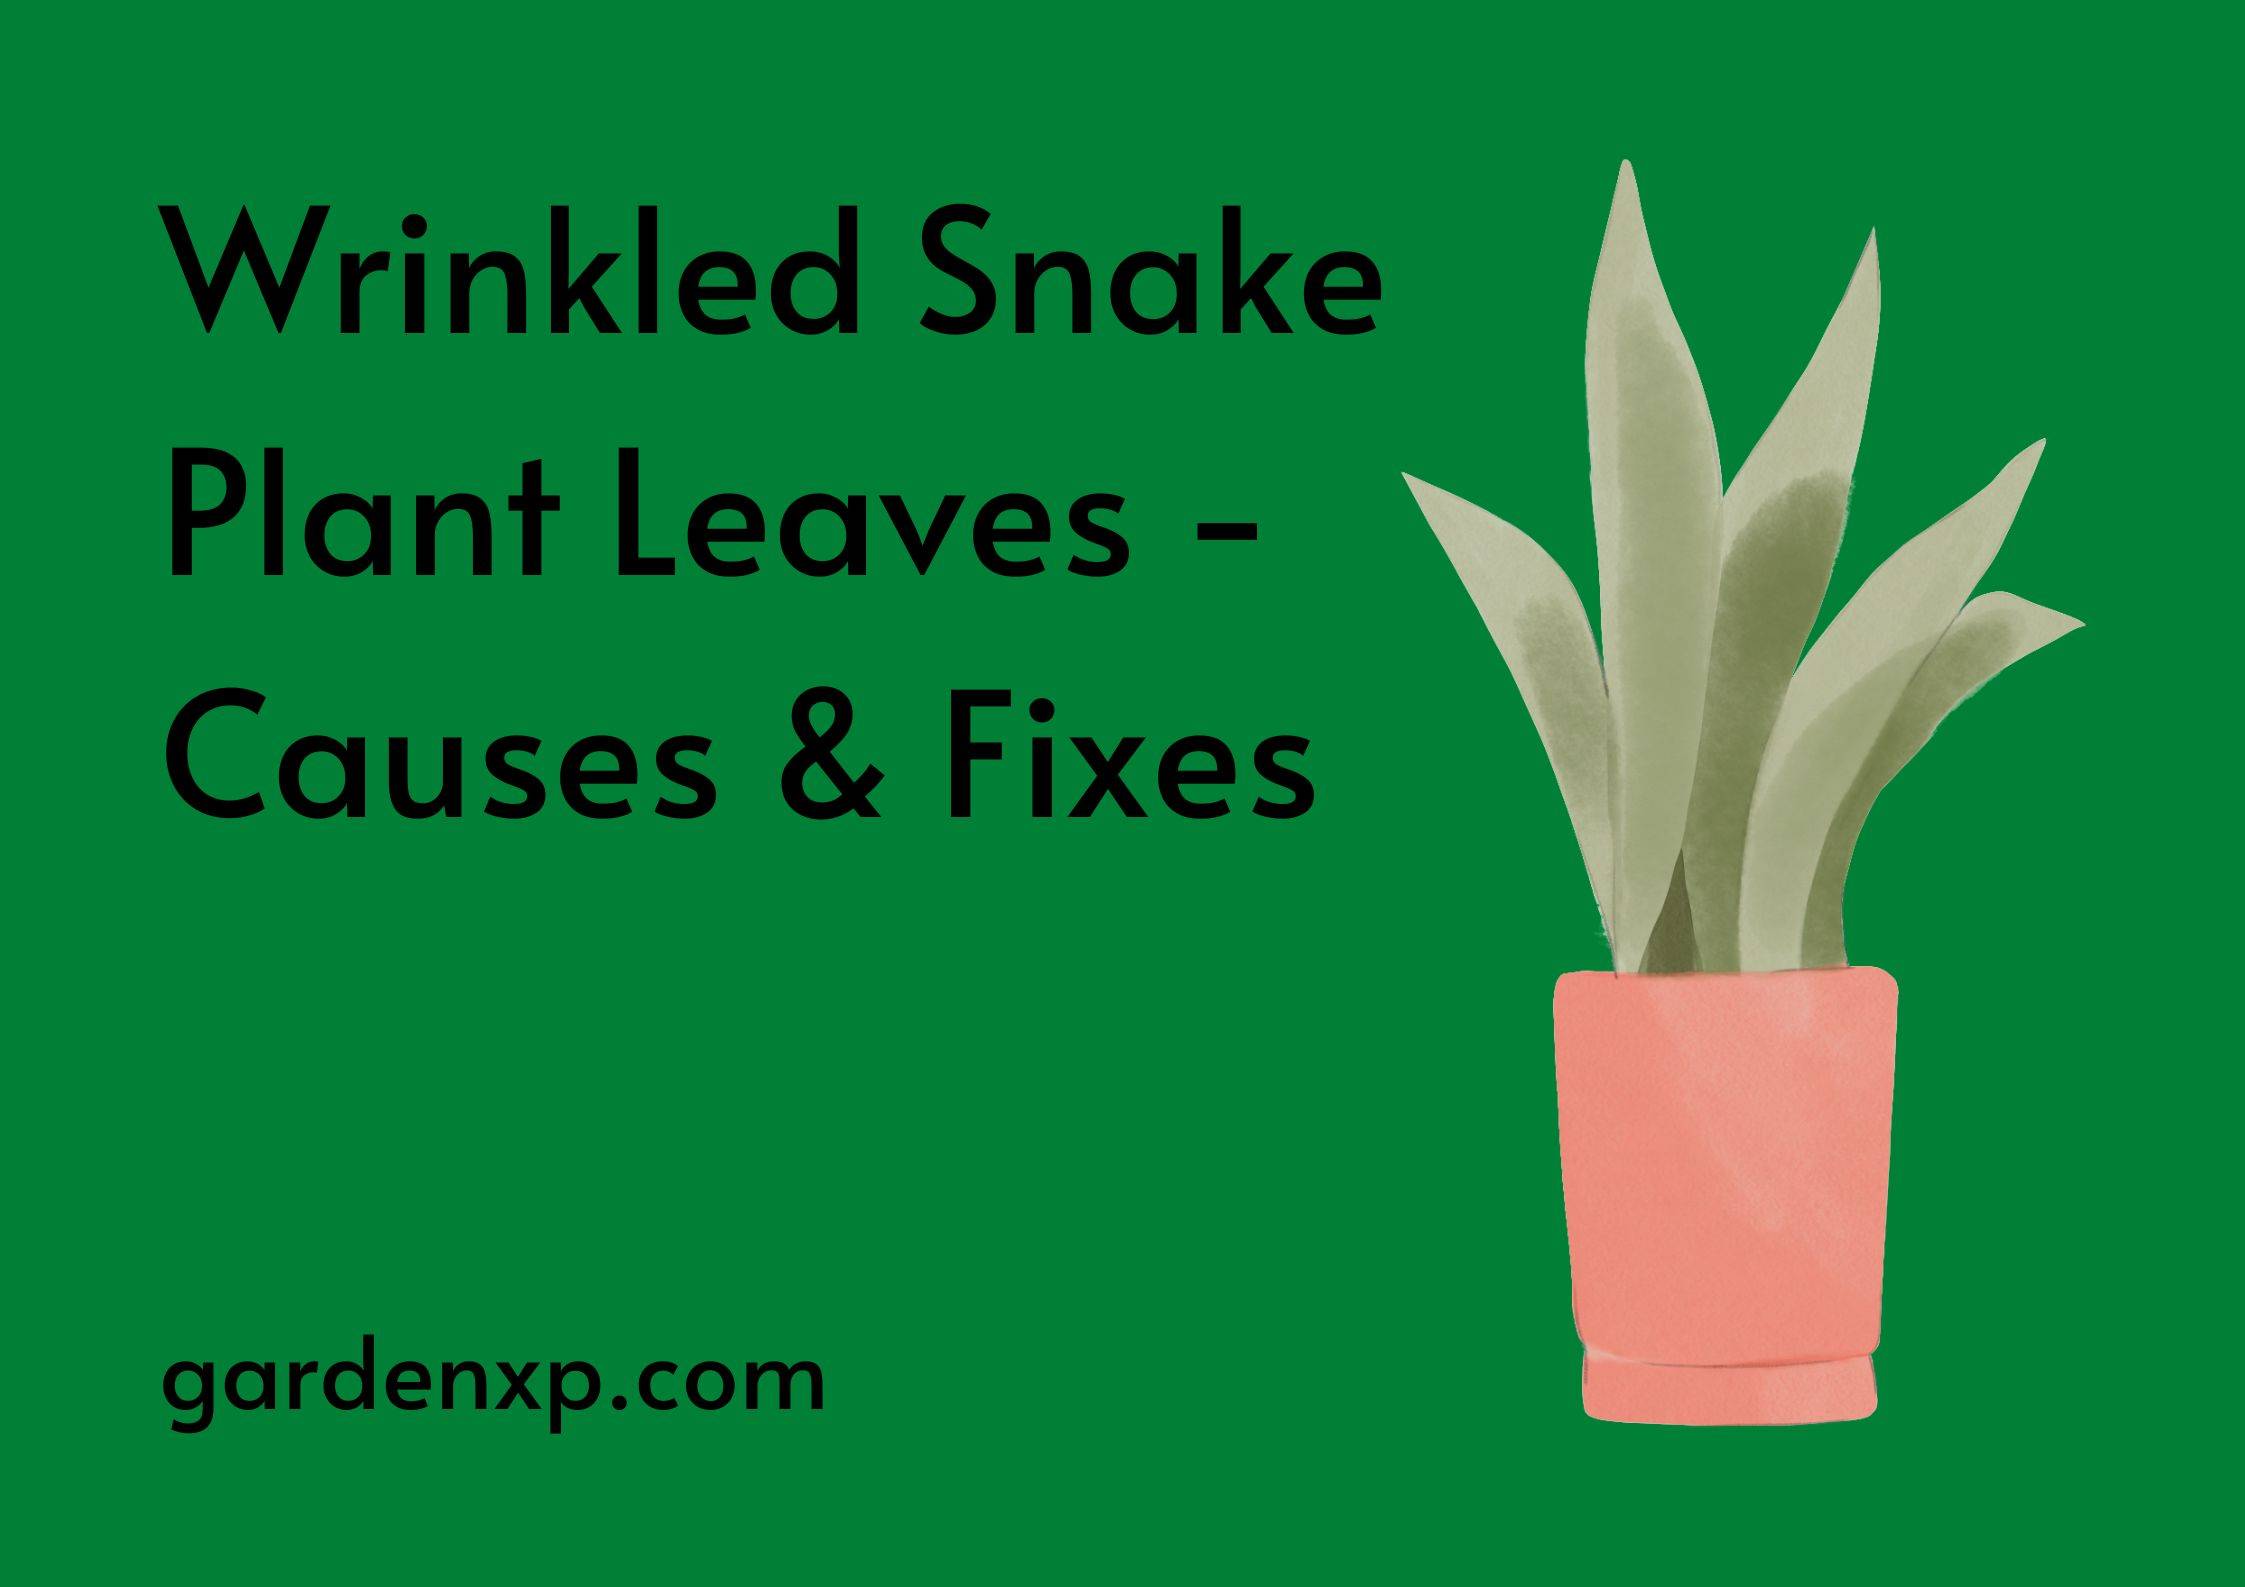 Wrinkled Snake Plant Leaves - Causes & Fixes